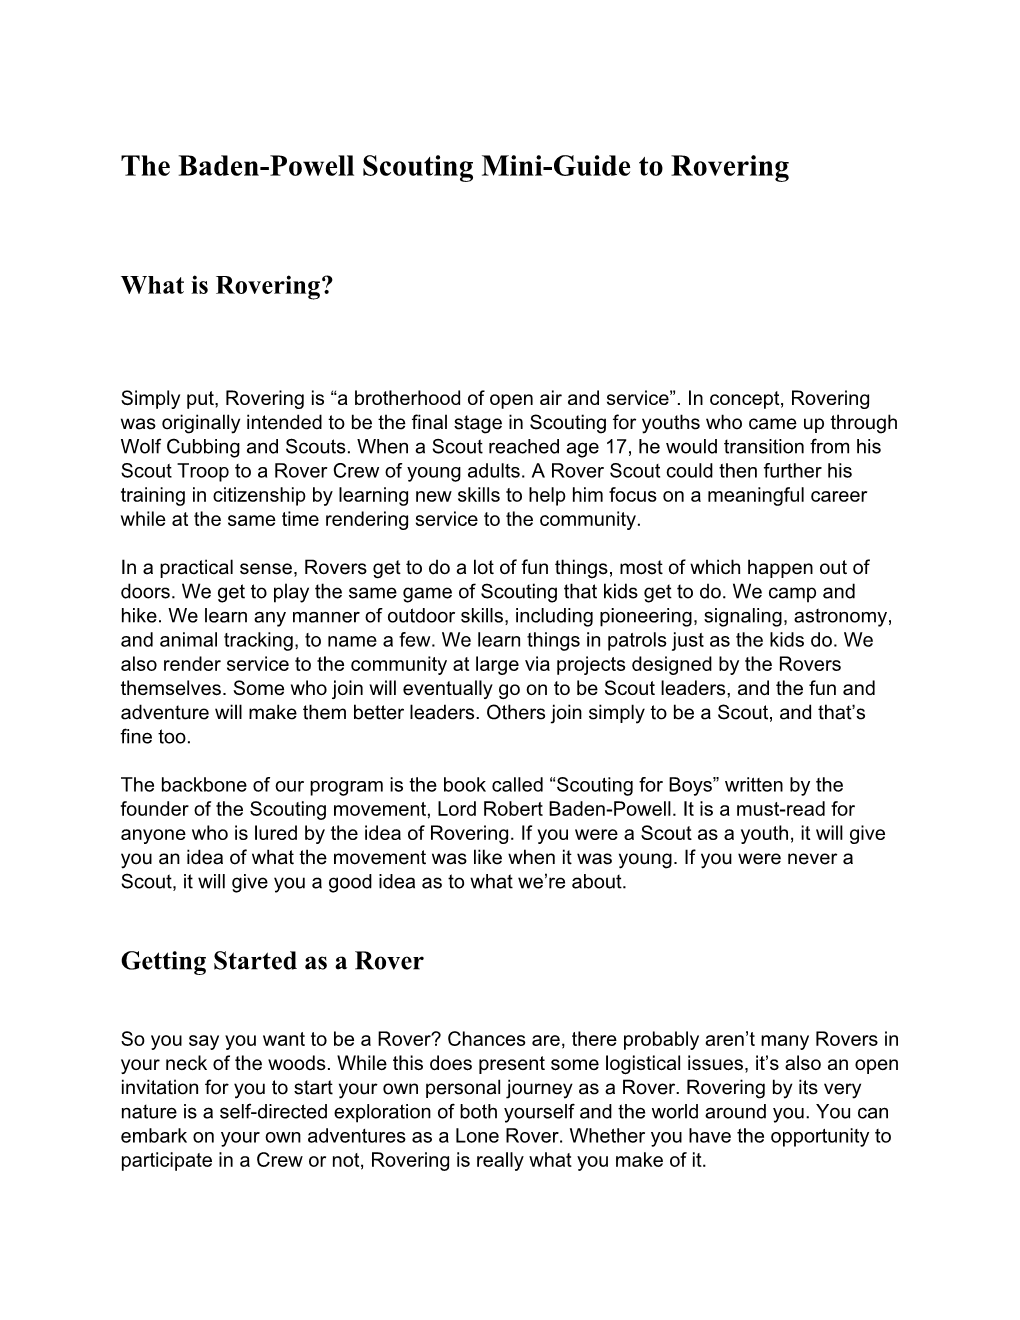 The Baden-Powell Scouting Mini-Guide to Rovering